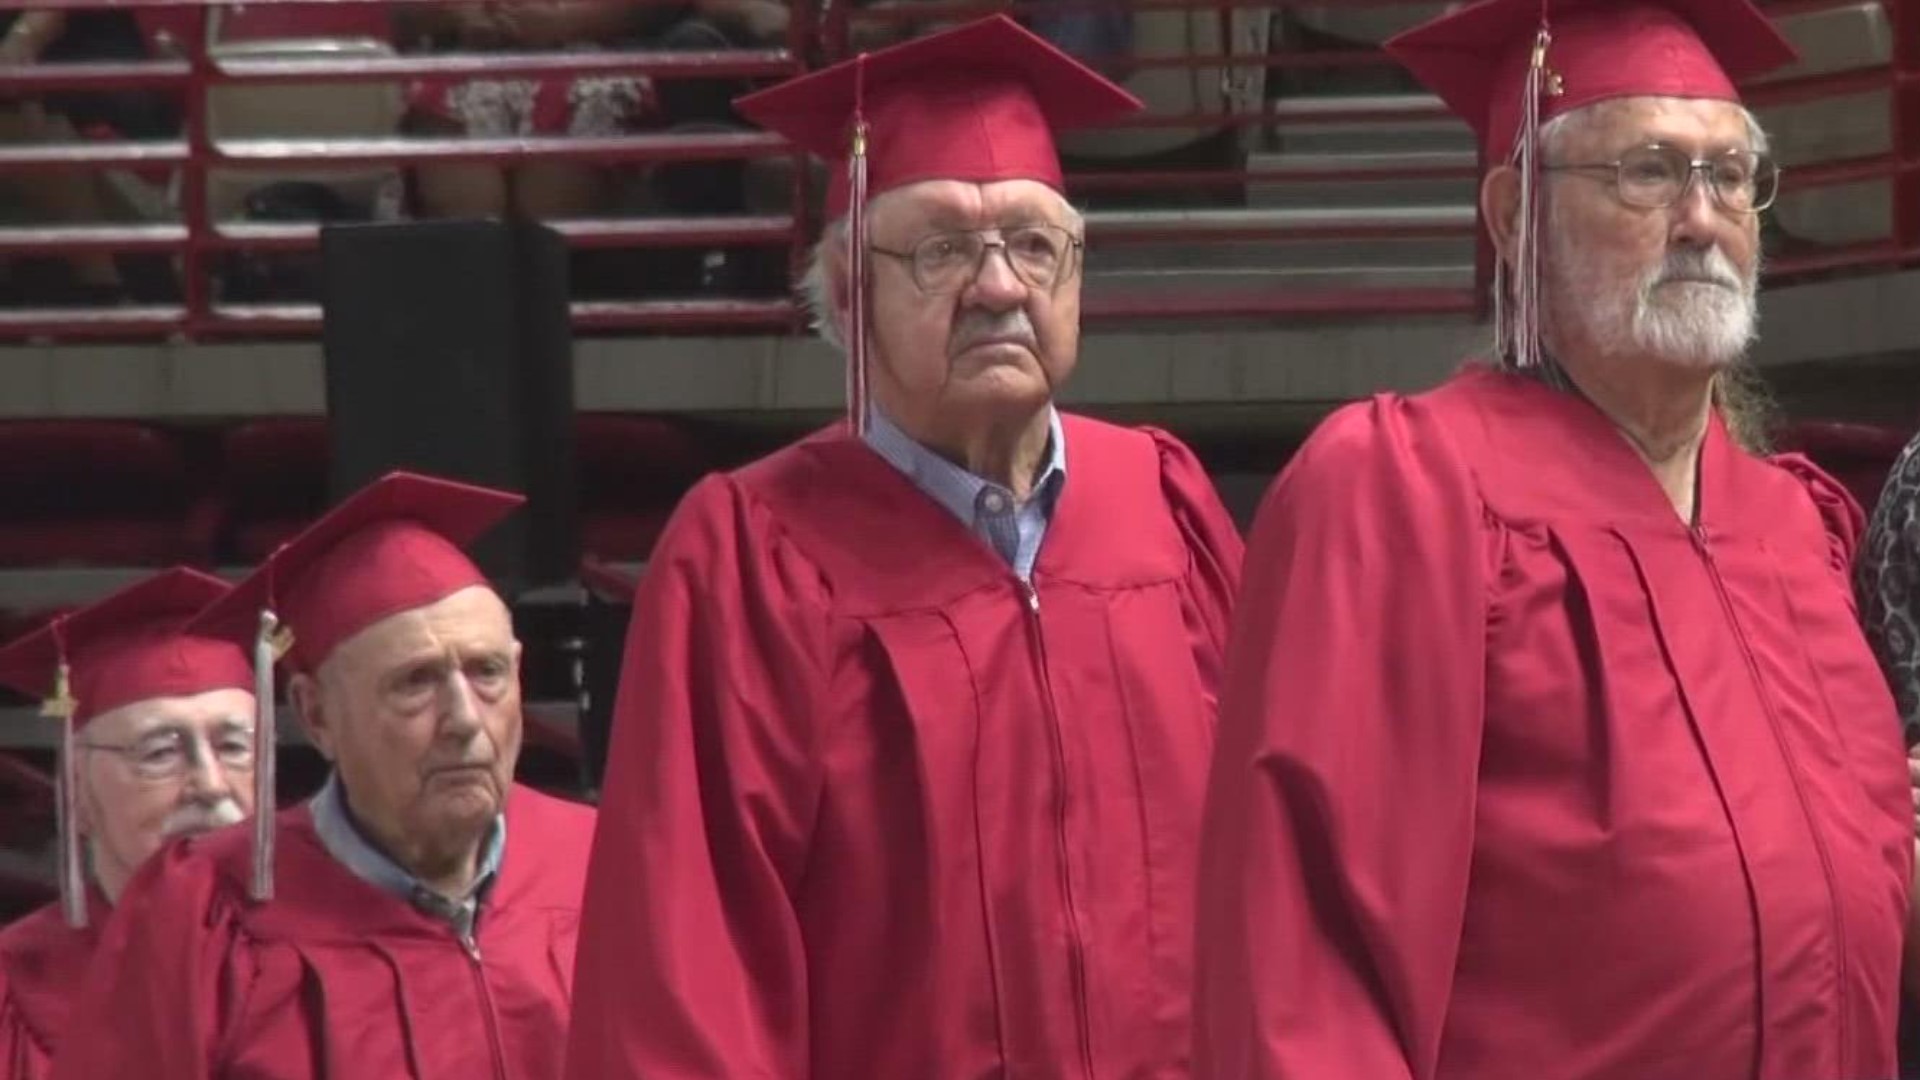 Four seniors from the 1956 Springdale High School Class missed their graduation to enter the armed forces.